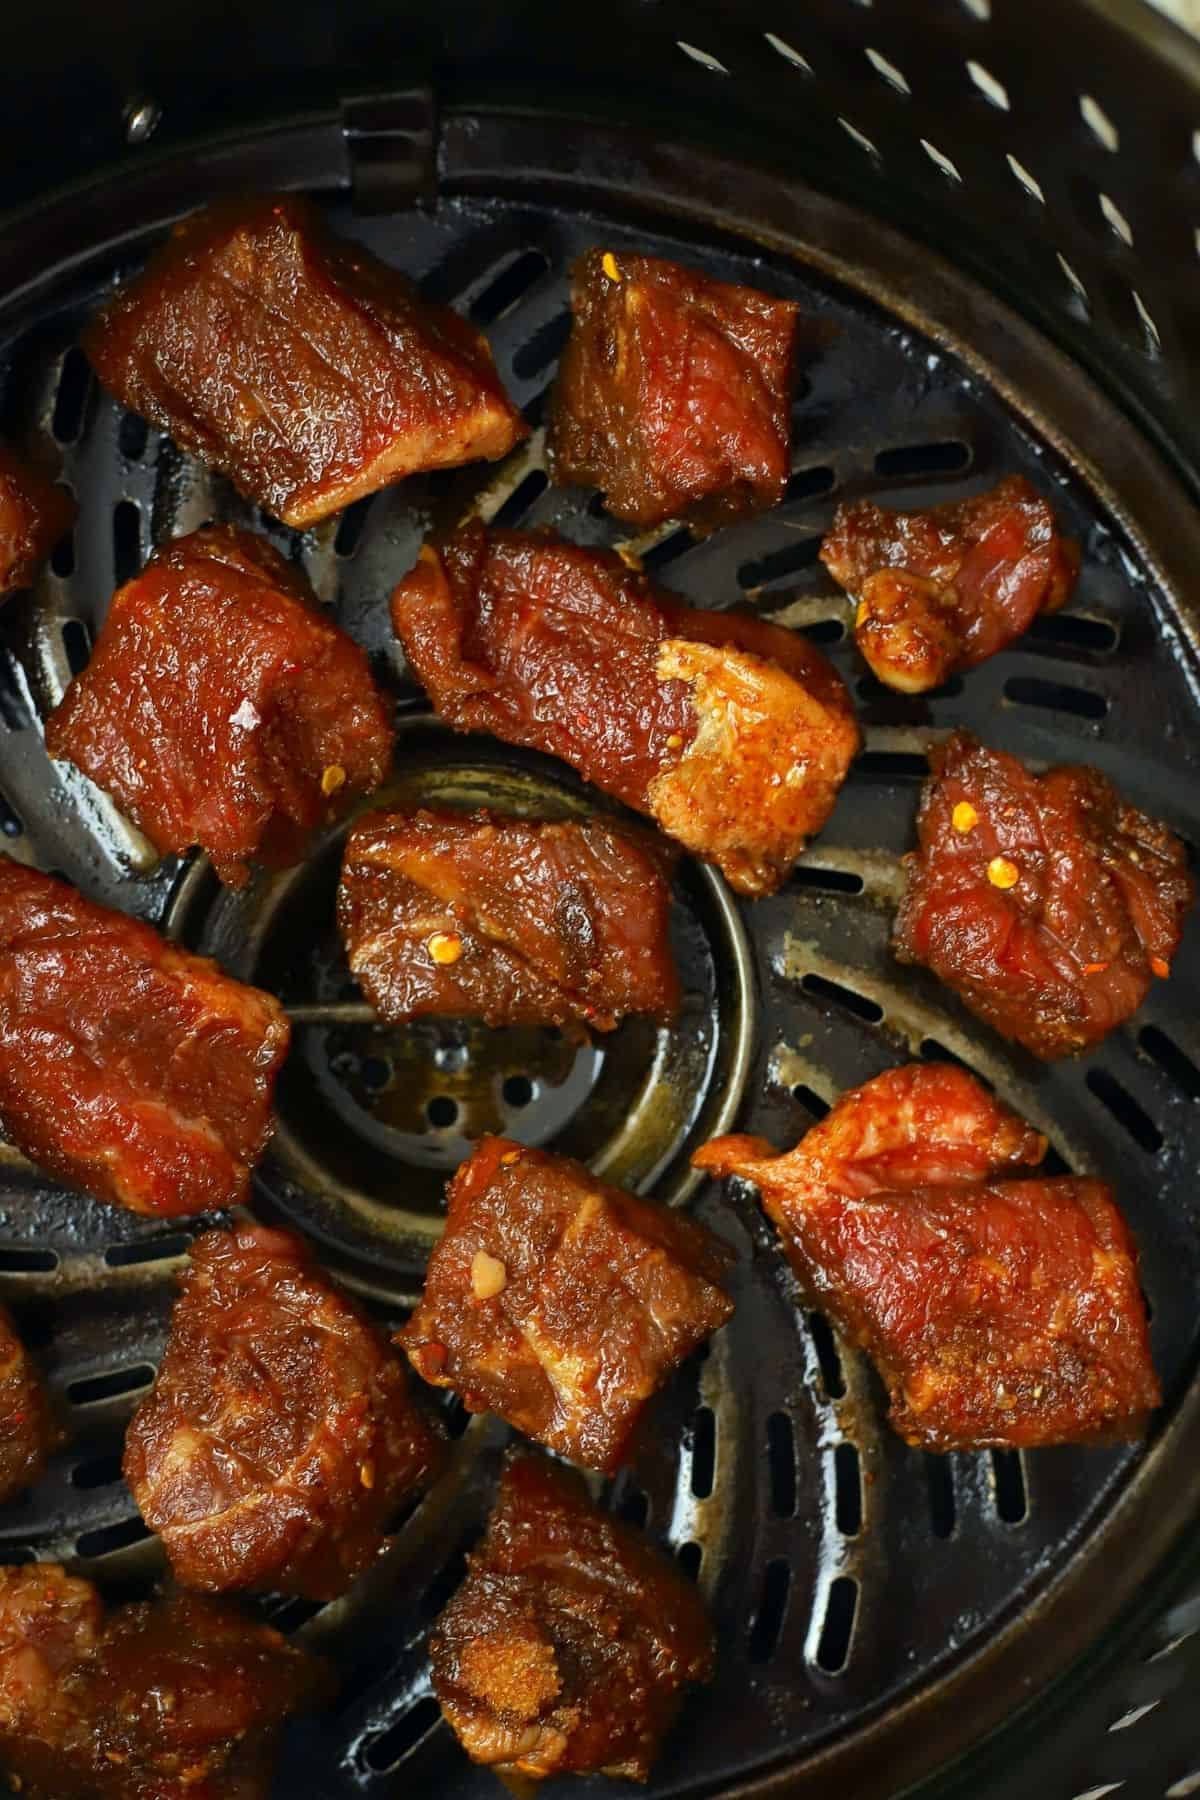 uncooked cubes of keto steak bites in the air fryer basket.